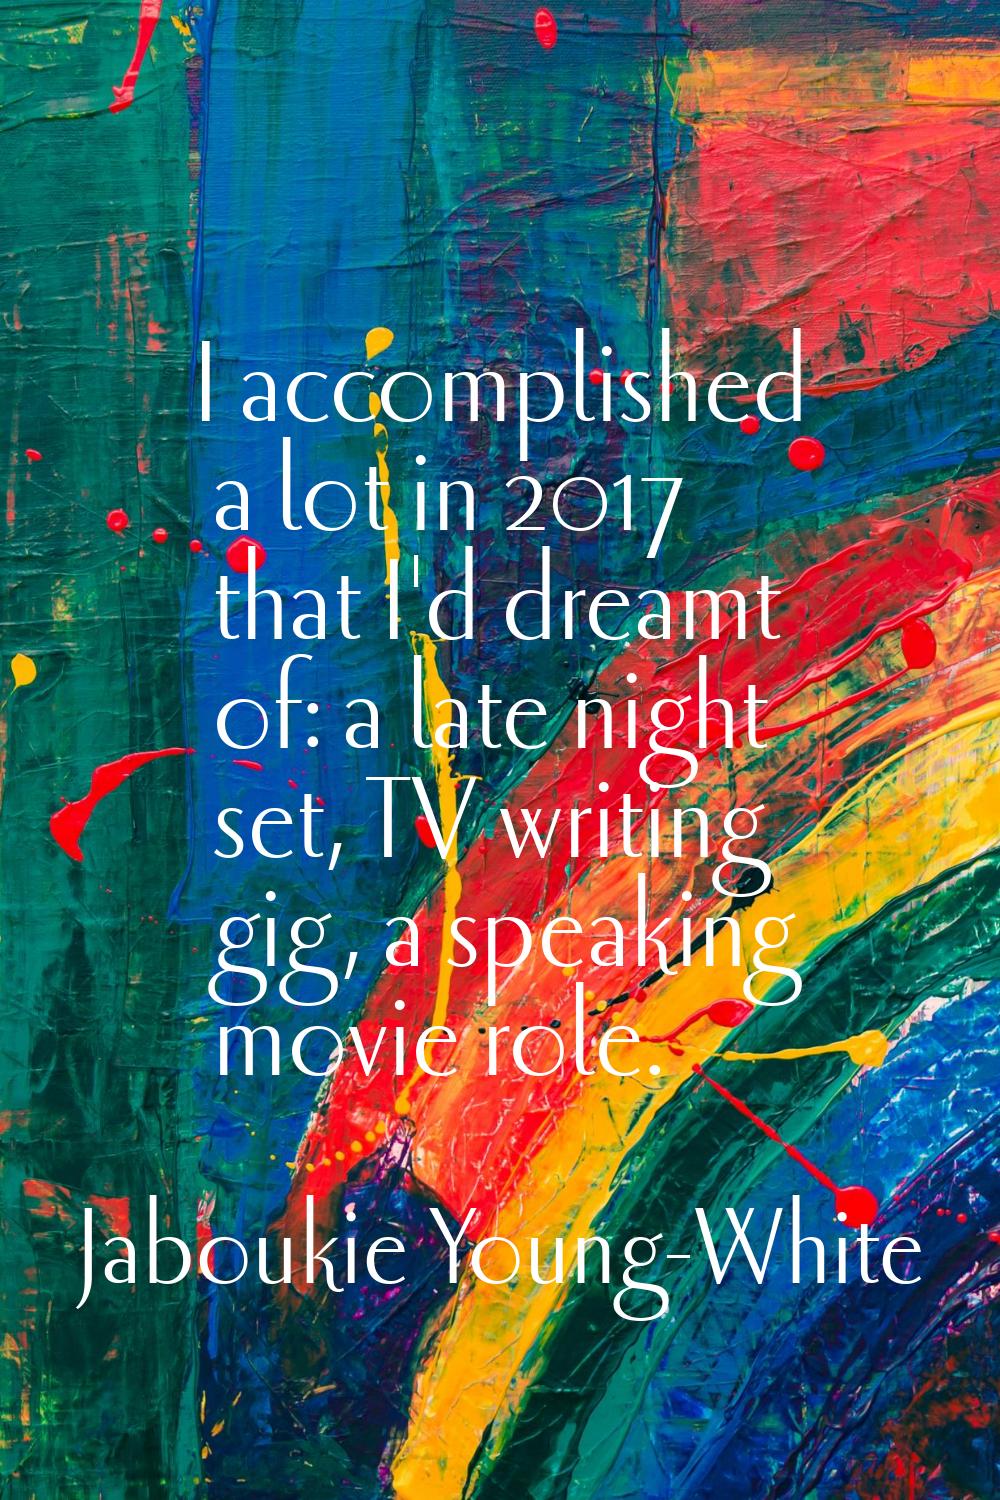 I accomplished a lot in 2017 that I'd dreamt of: a late night set, TV writing gig, a speaking movie